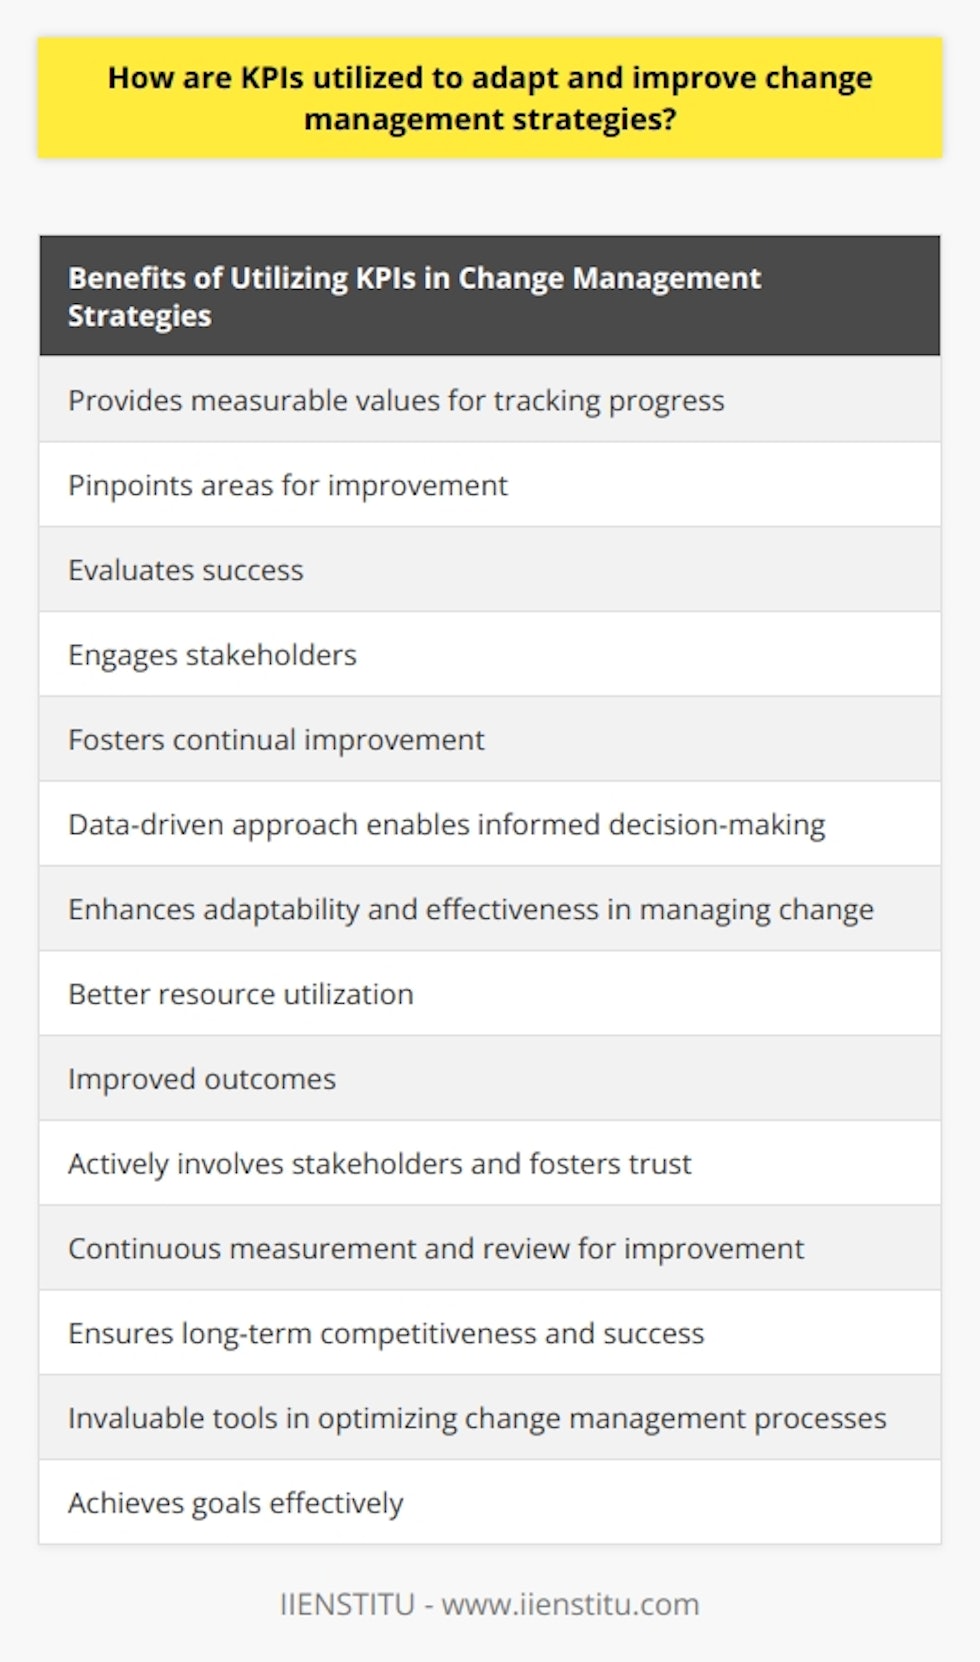 KPIs play a crucial role in change management strategies, providing measurable values for tracking progress, pinpointing areas for improvement, evaluating success, engaging stakeholders, and fostering continual improvement. By utilizing KPIs, organizations can enhance their adaptability and effectiveness in managing change. This data-driven approach enables informed decision-making and better resource utilization, resulting in improved outcomes. By setting clear targets and regularly reporting on progress, stakeholders are actively involved and trust is fostered. Through the iterative process of measuring and reviewing performance, organizations continuously strive for improvement, ensuring long-term competitiveness and success. KPIs are invaluable tools in optimizing change management processes and achieving goals effectively.